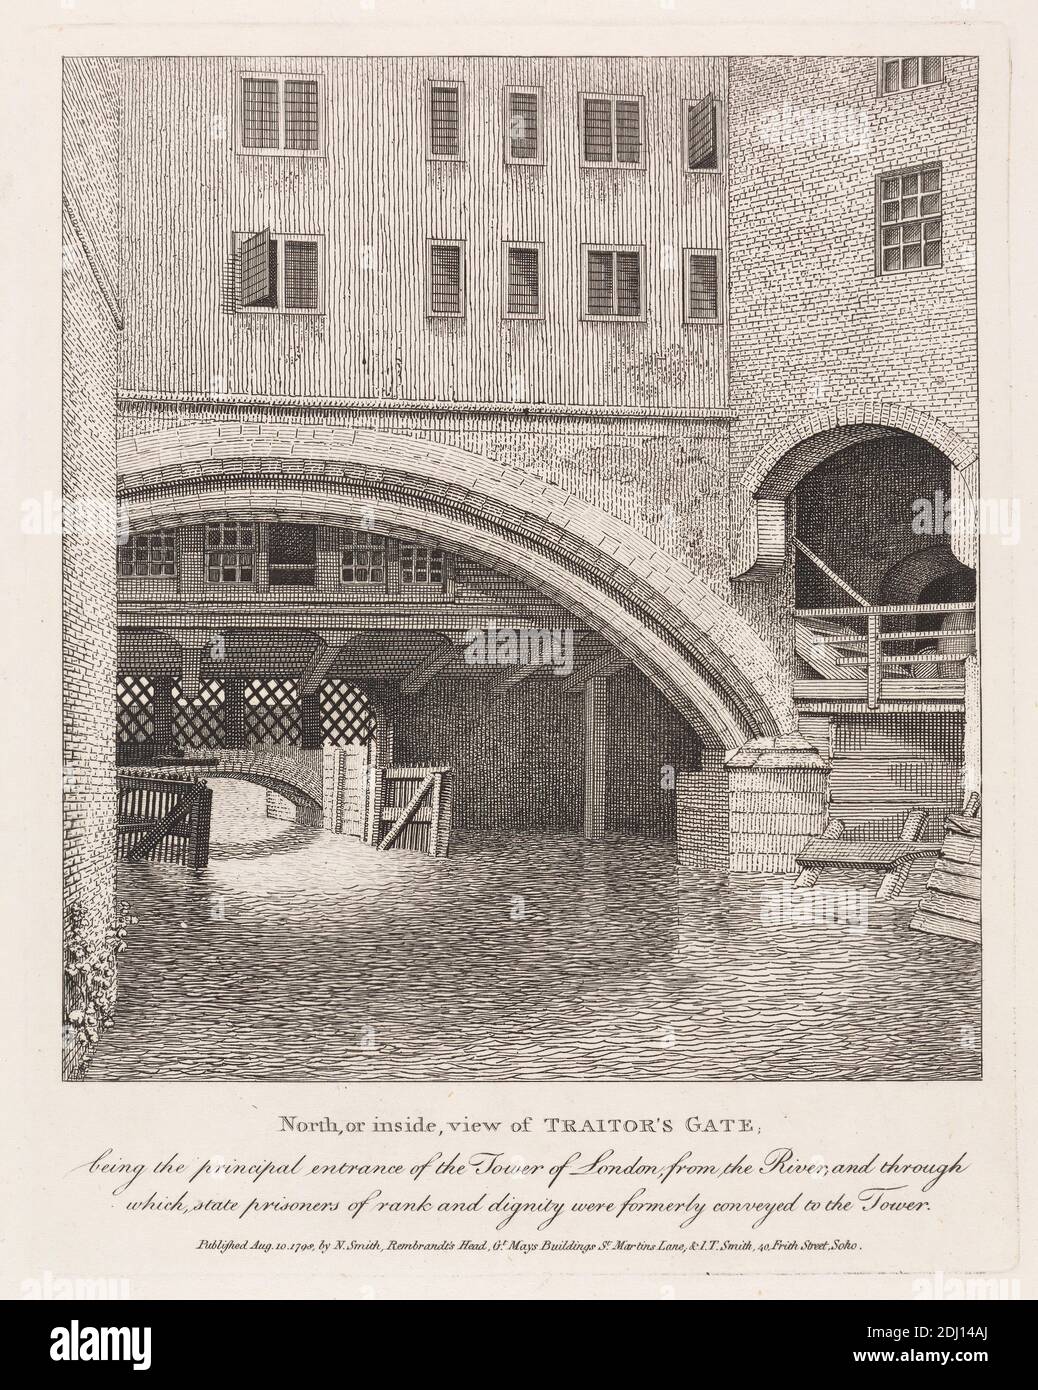 Nord, o all'interno, View of Traitor's Gate, artista sconosciuto, dopo artista sconosciuto, 1798, incisione Foto Stock